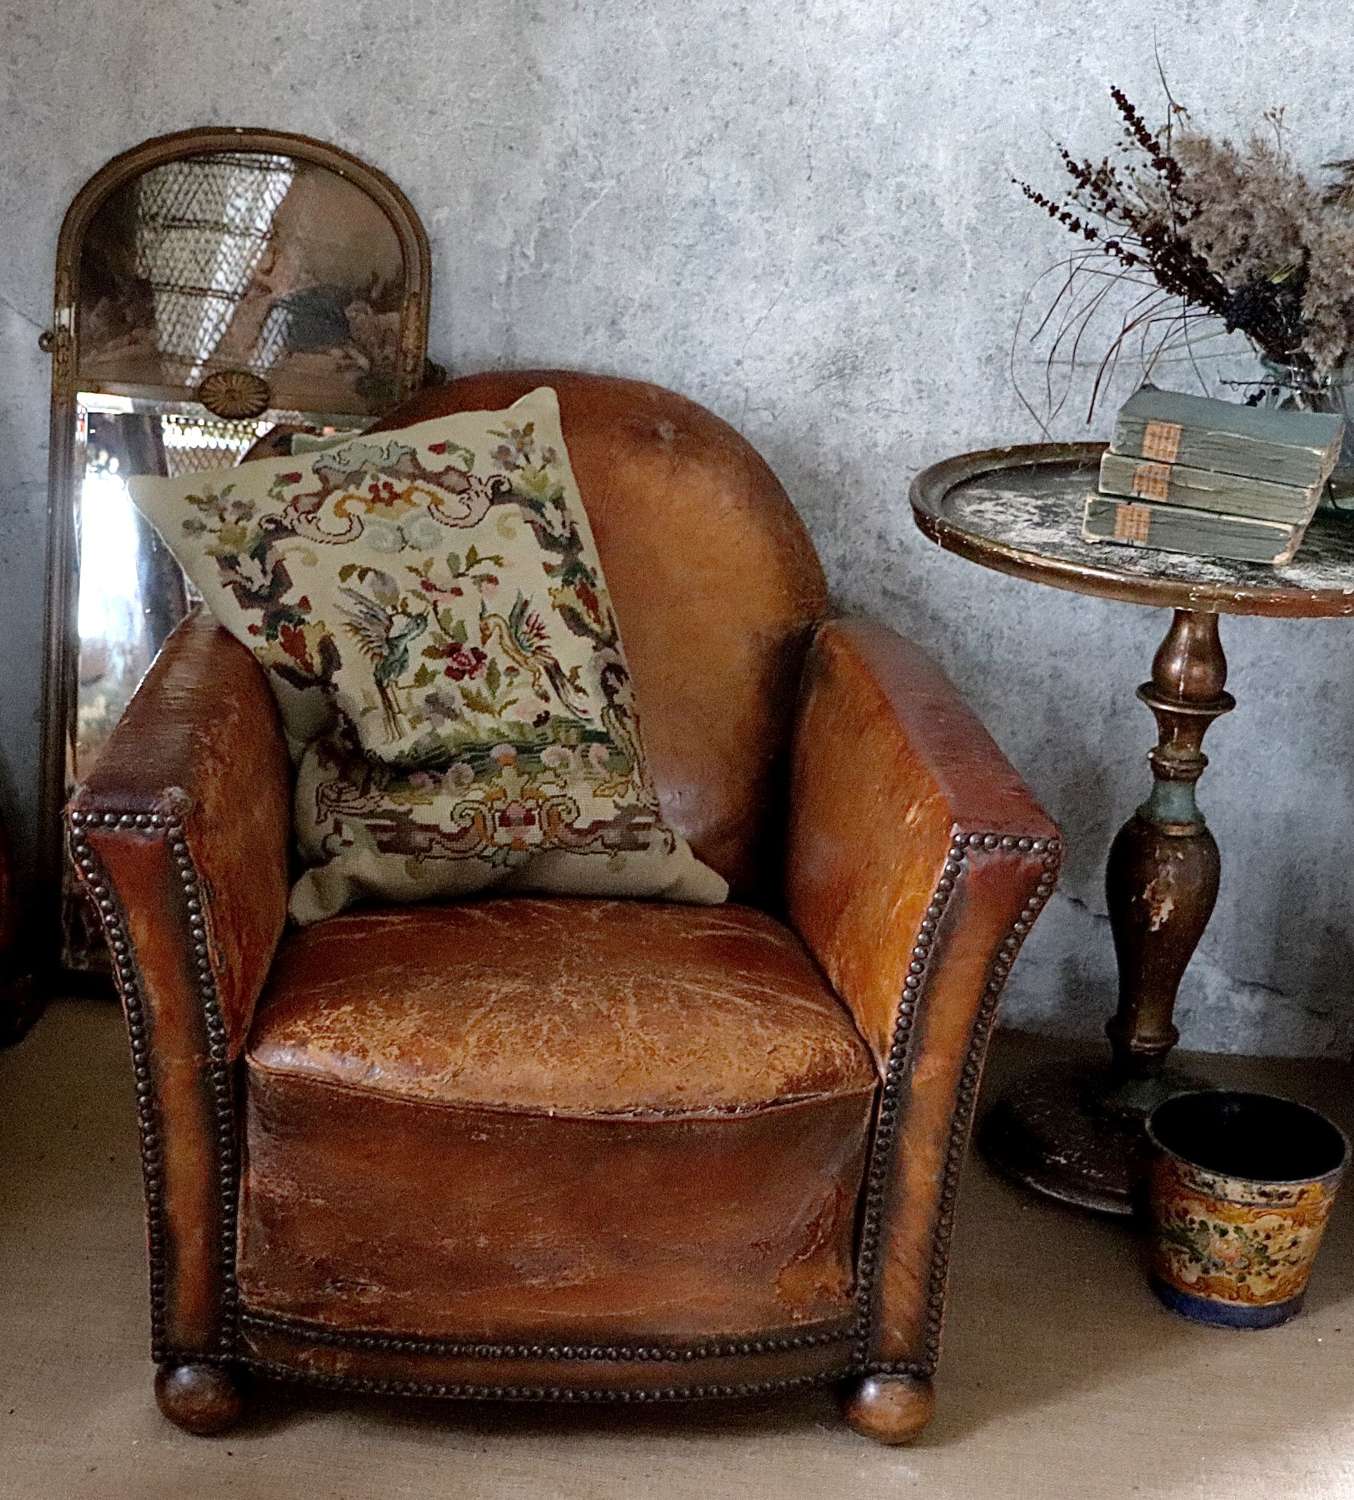 Early 20th century French leather club chair